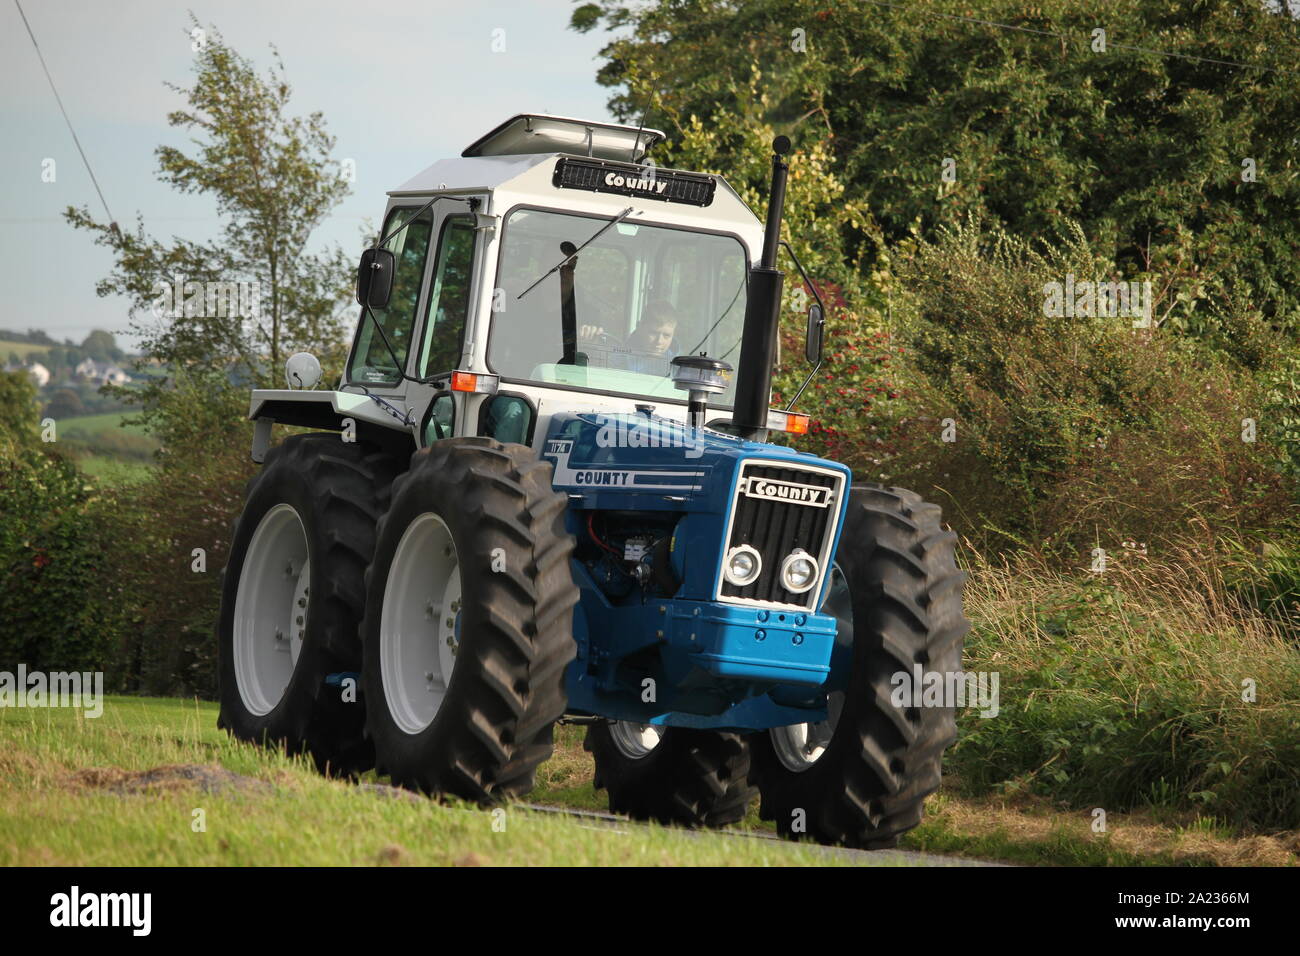 County 974 Tractor Poster A3 